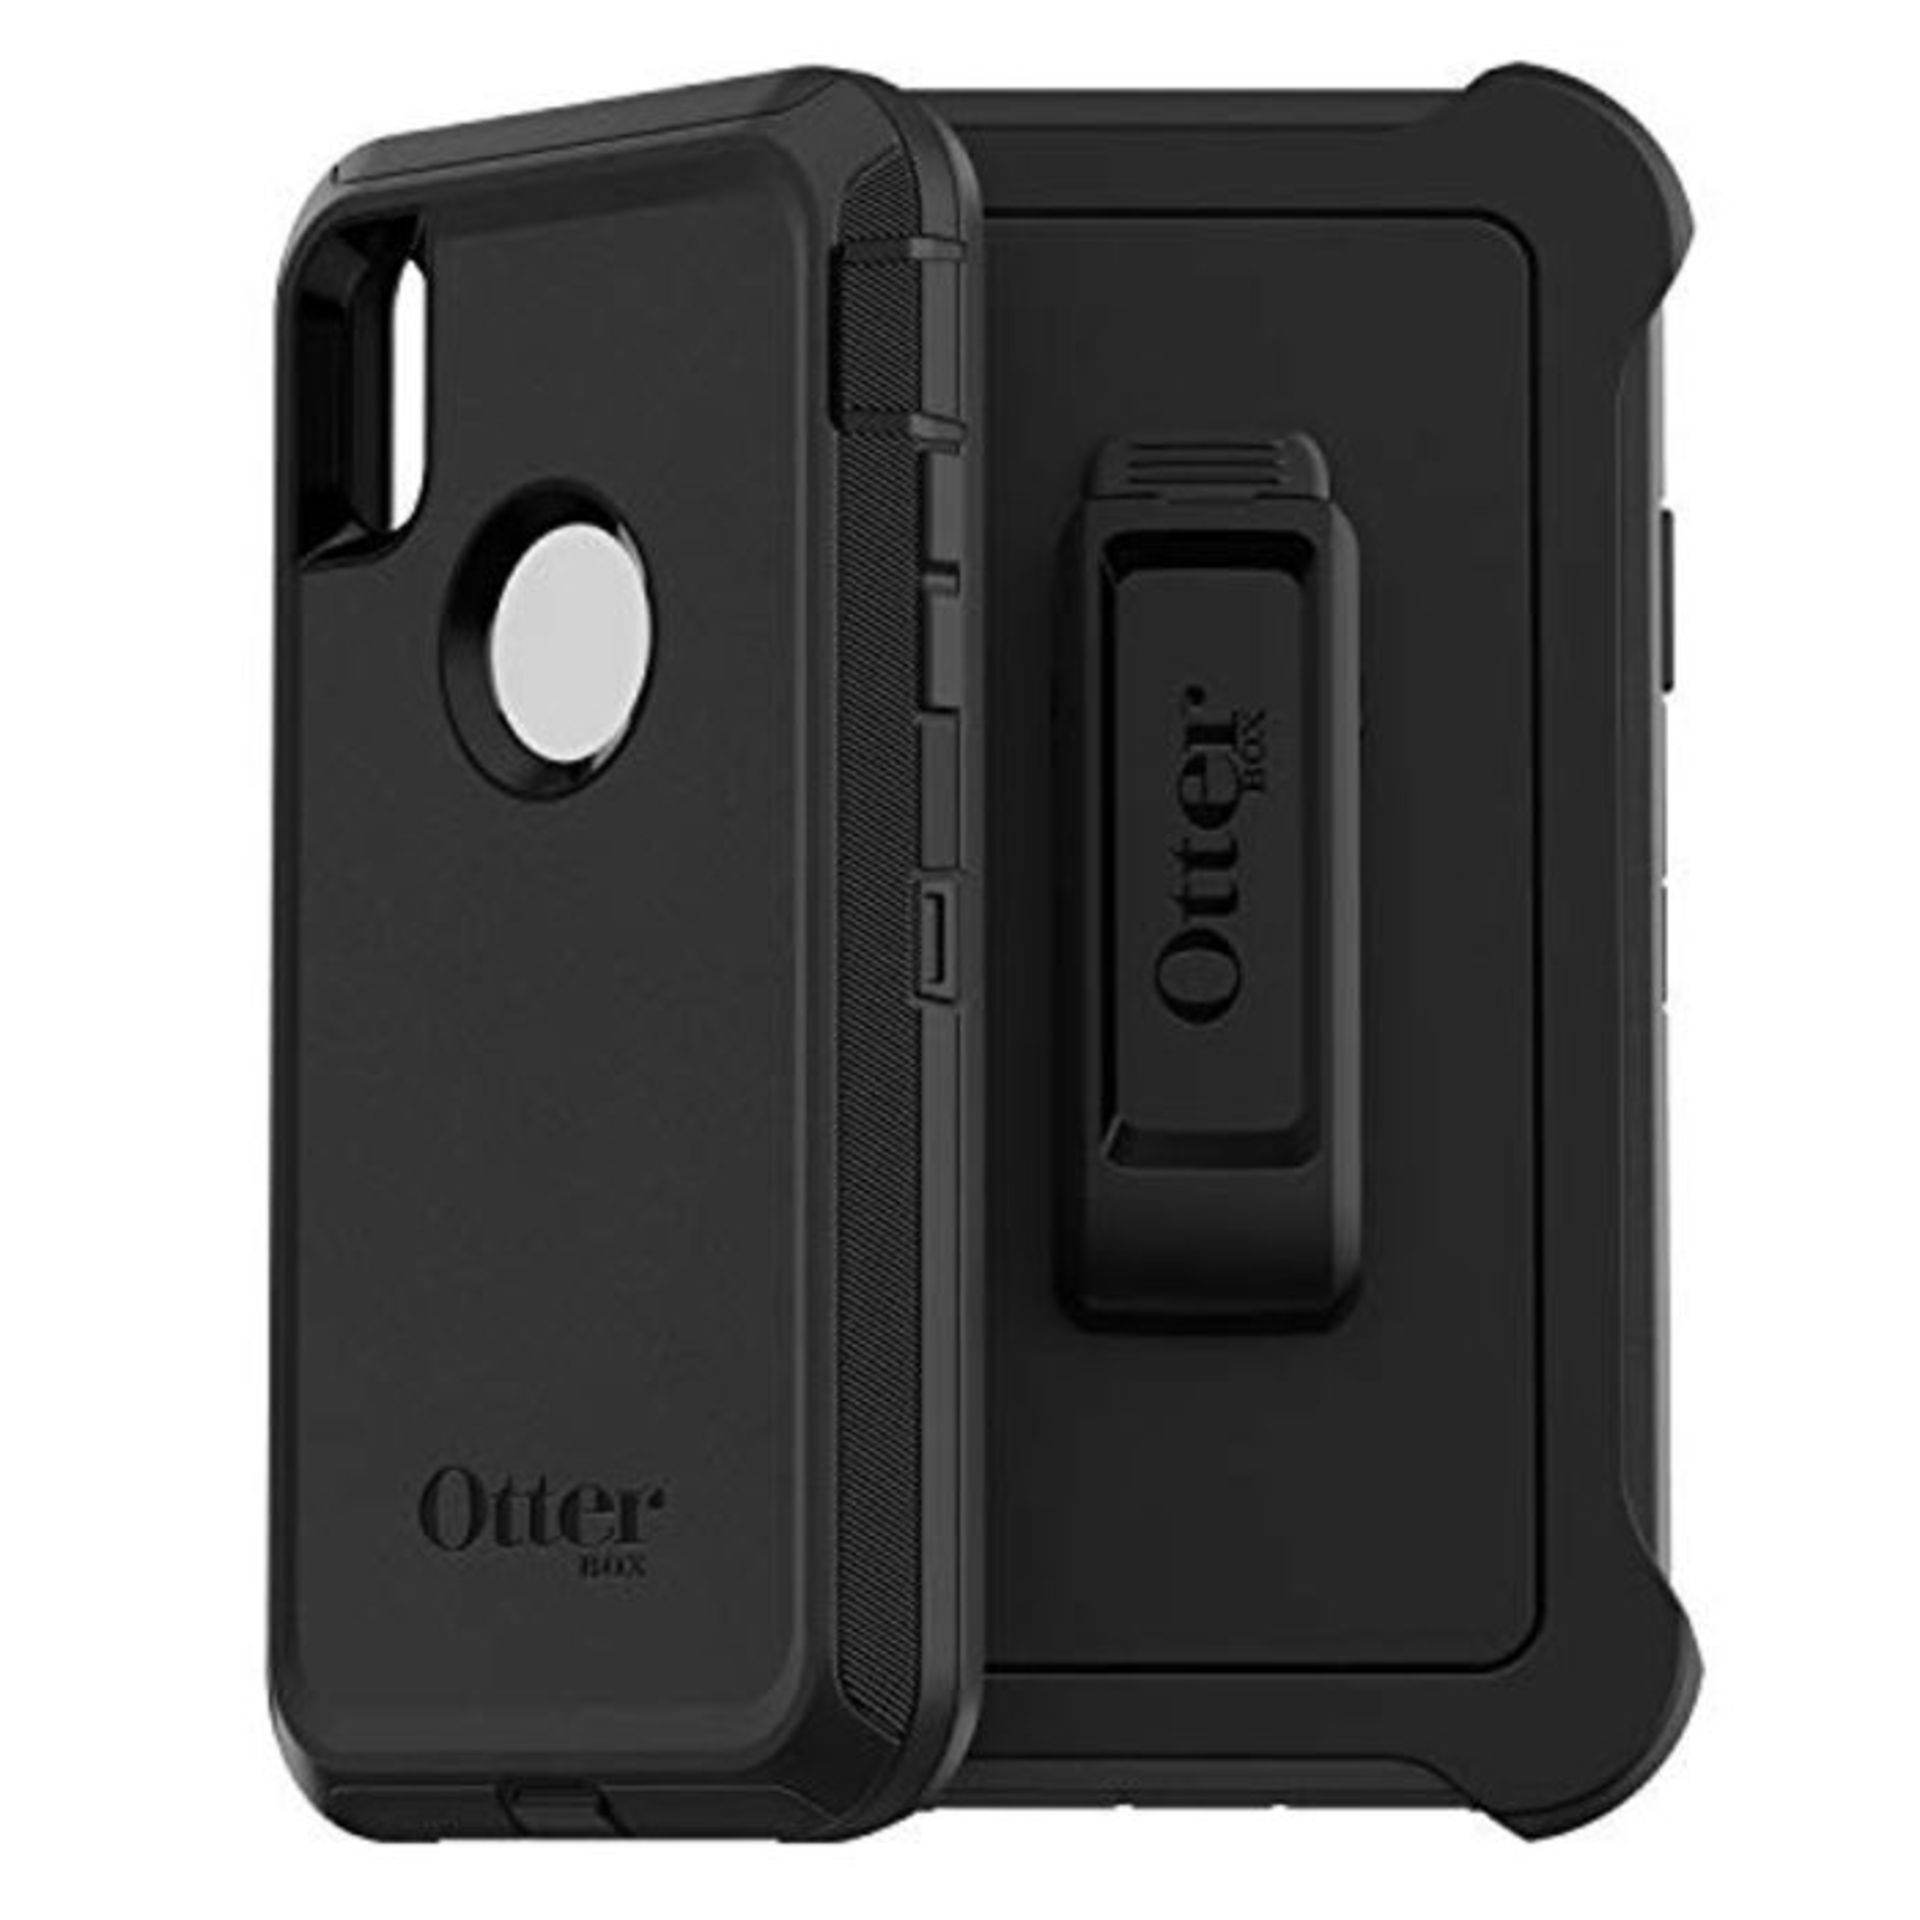 OtterBox Defender Case for iPhone XR, Shockproof, Drop Proof, Ultra-Rugged, Protective - Image 3 of 6